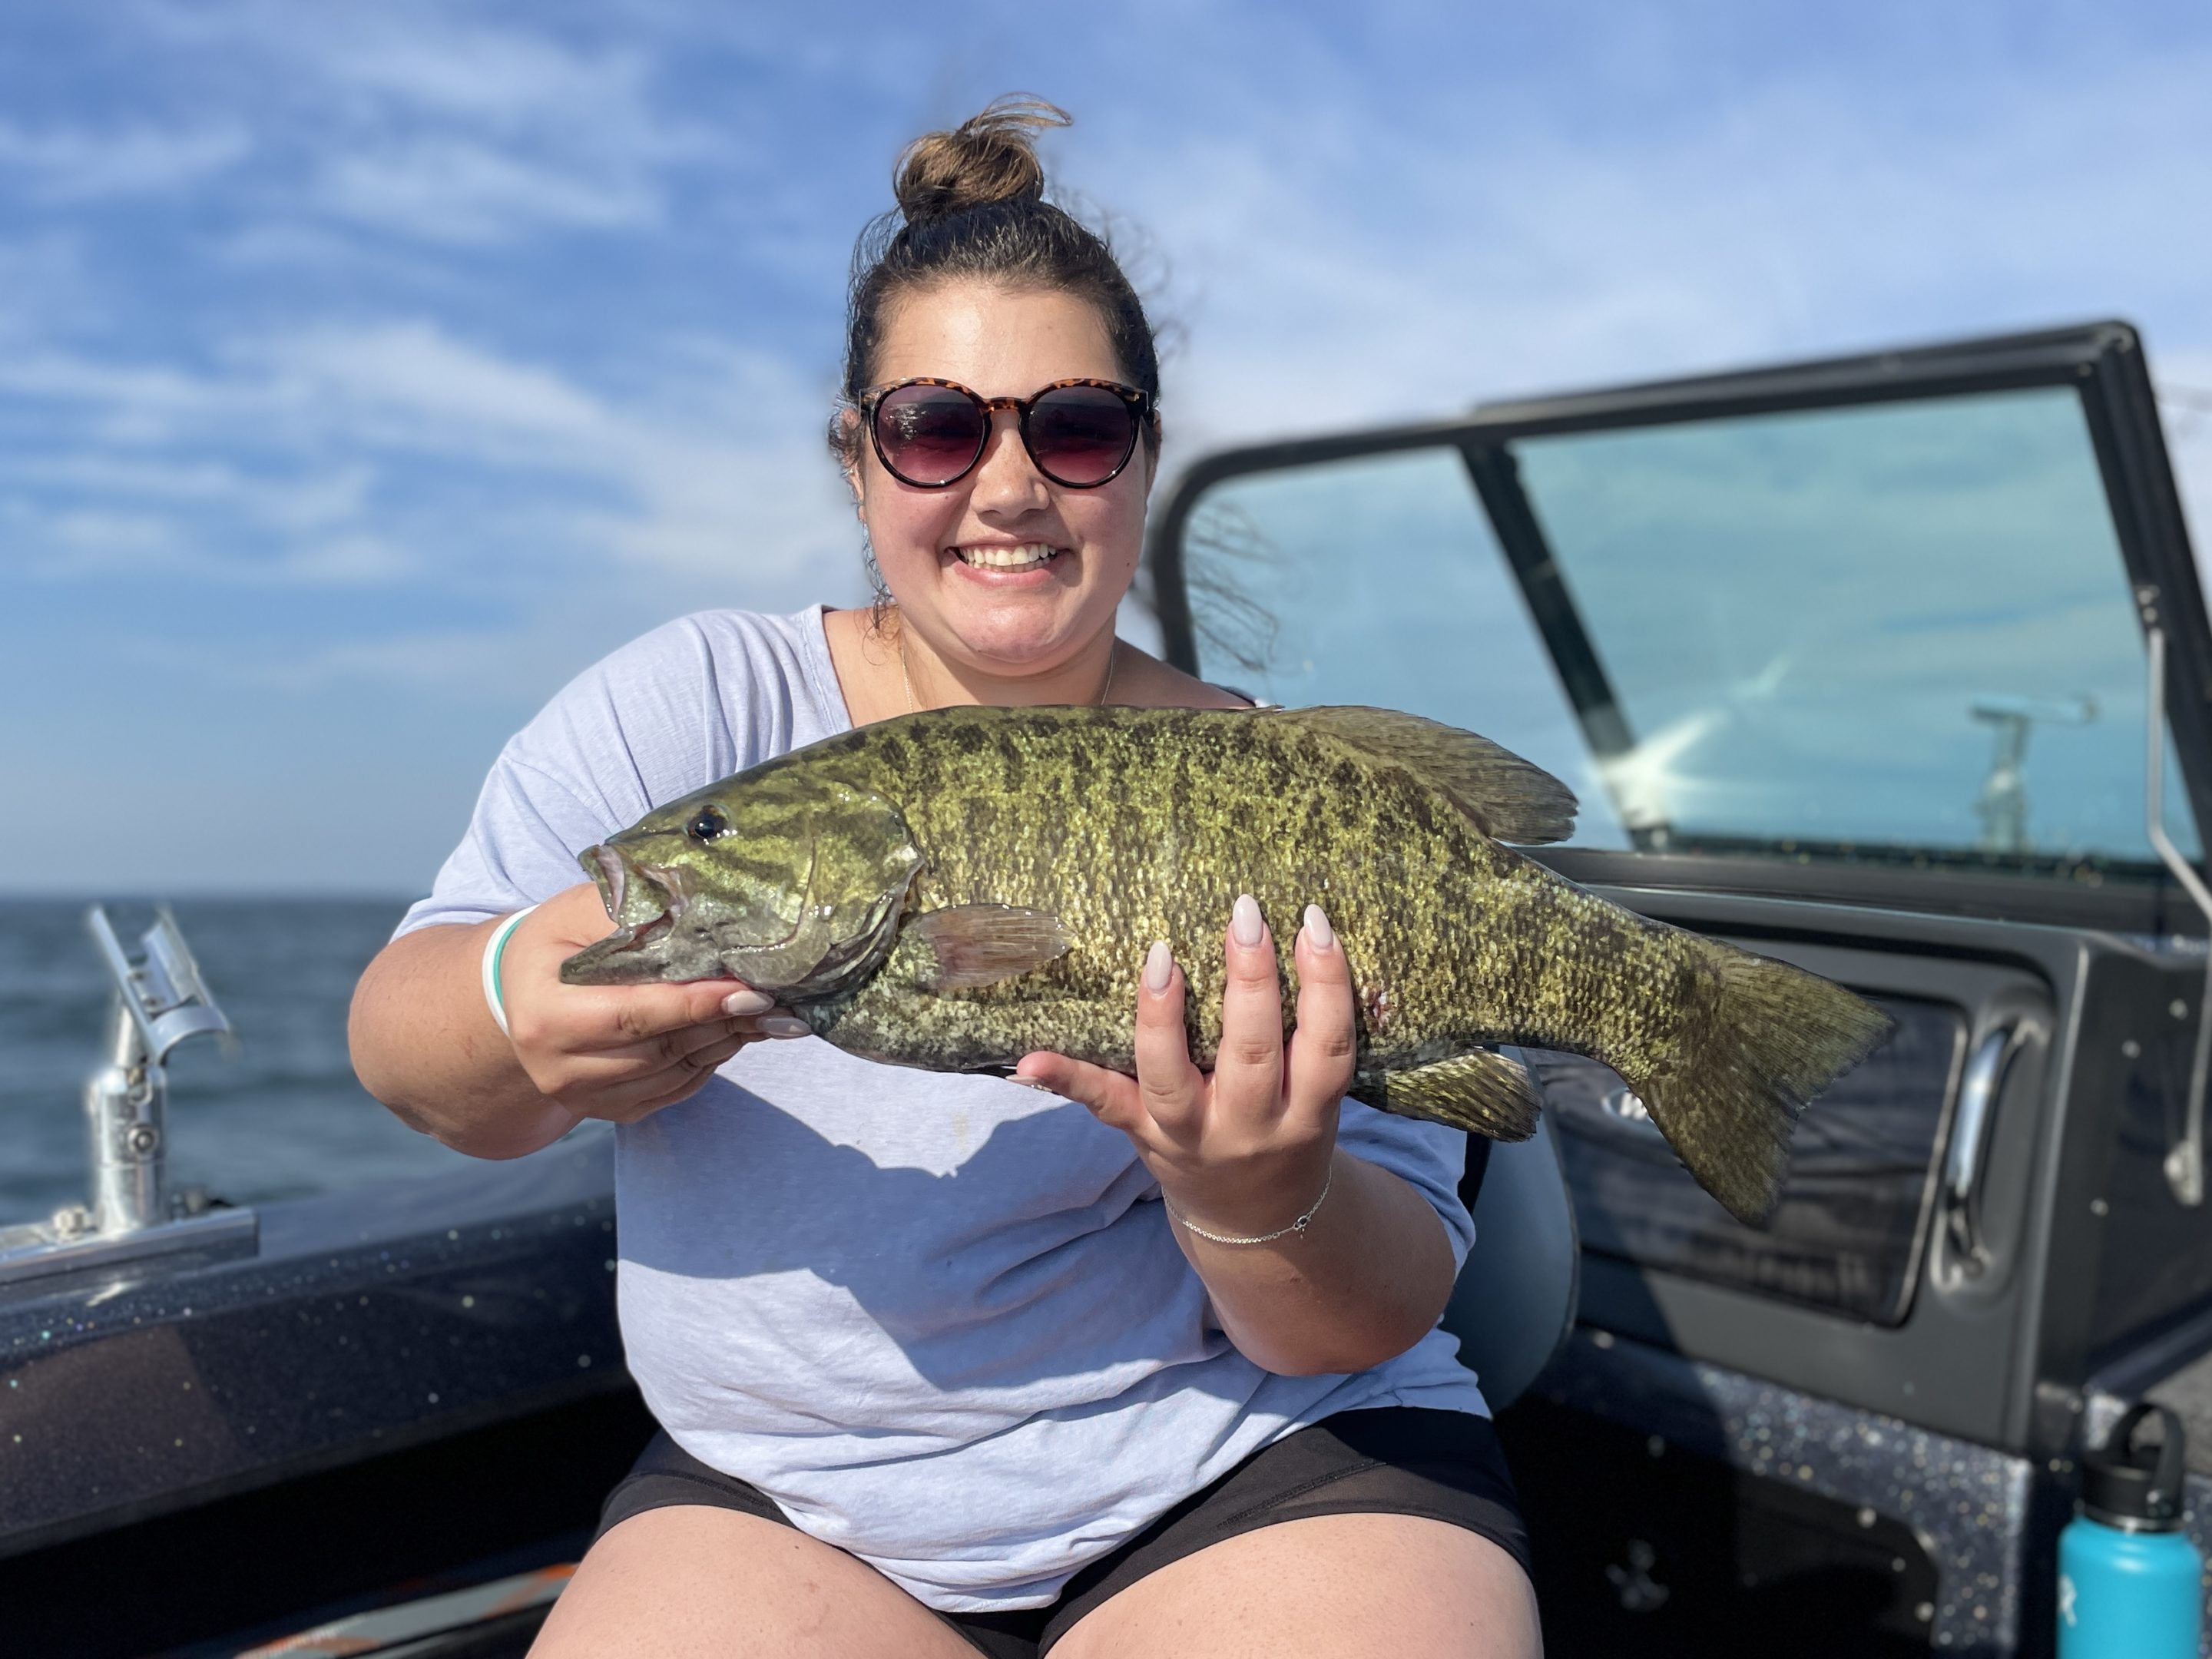 CEDAED9F C553 409D 8D4A 0022D28884B9 scaled - Buffalo NY Fishing Report - 06/26/2022